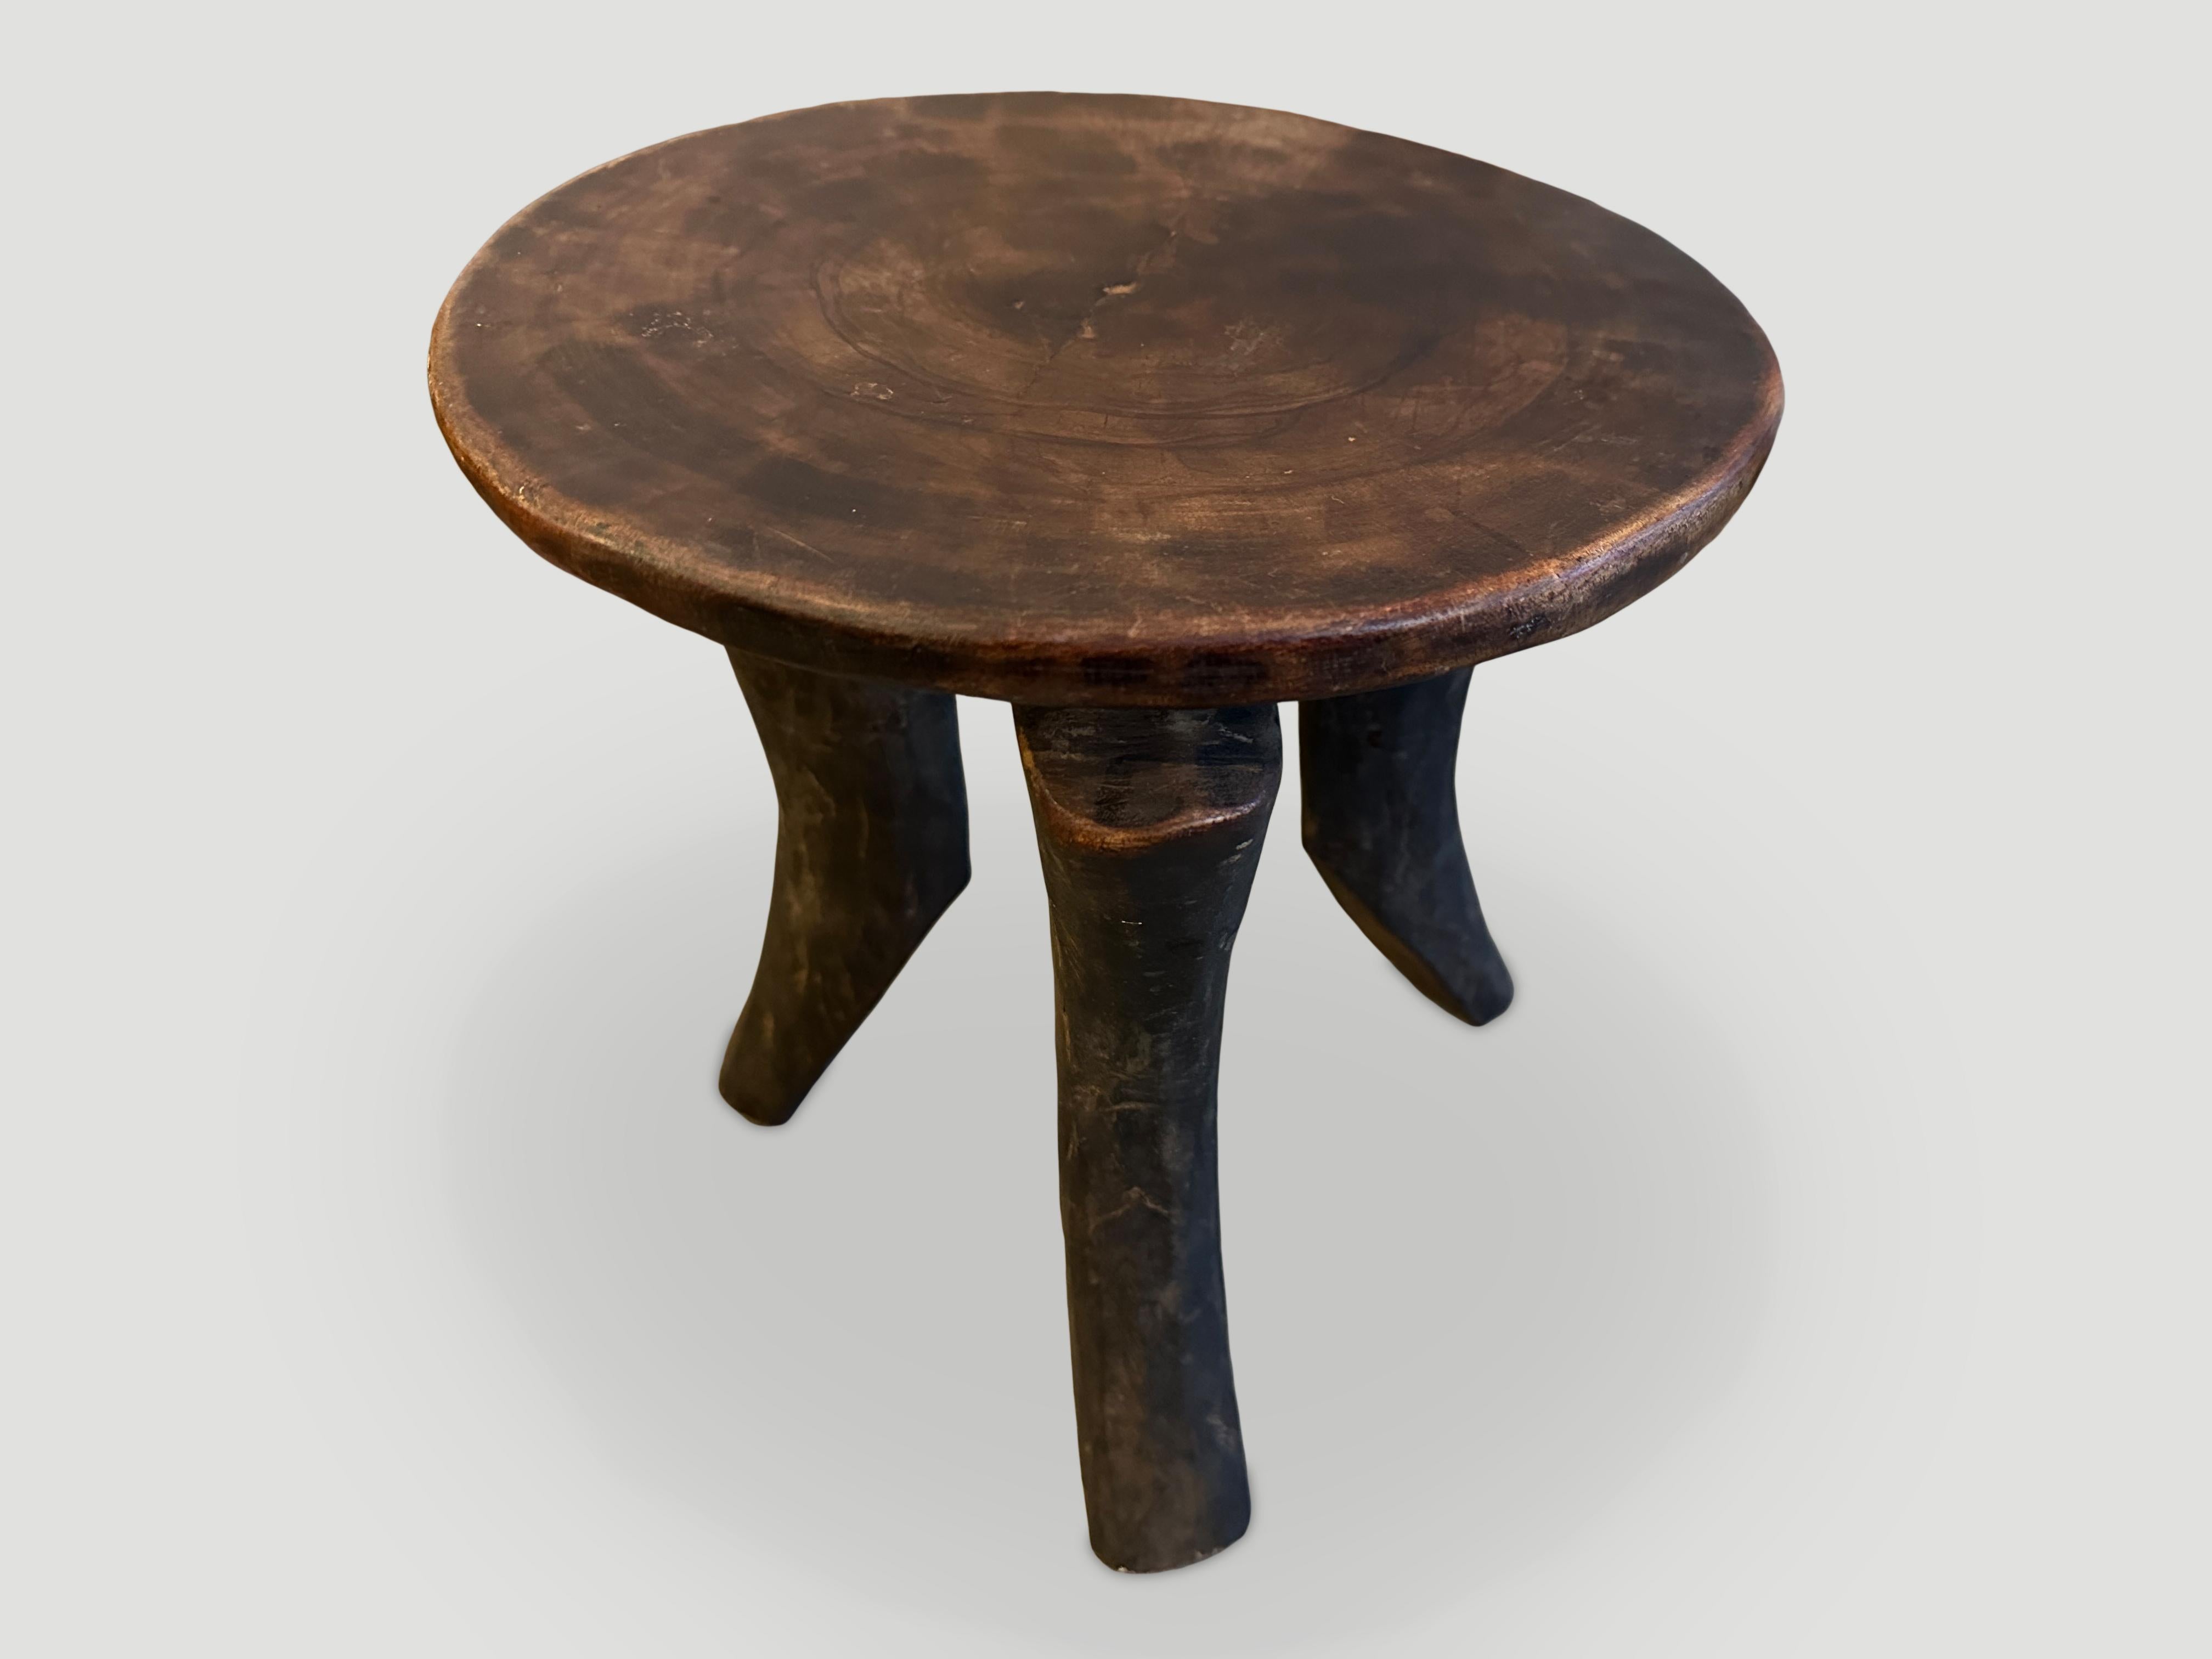 Tanzanian Andrianna Shamaris Antique Wooden African Side Table